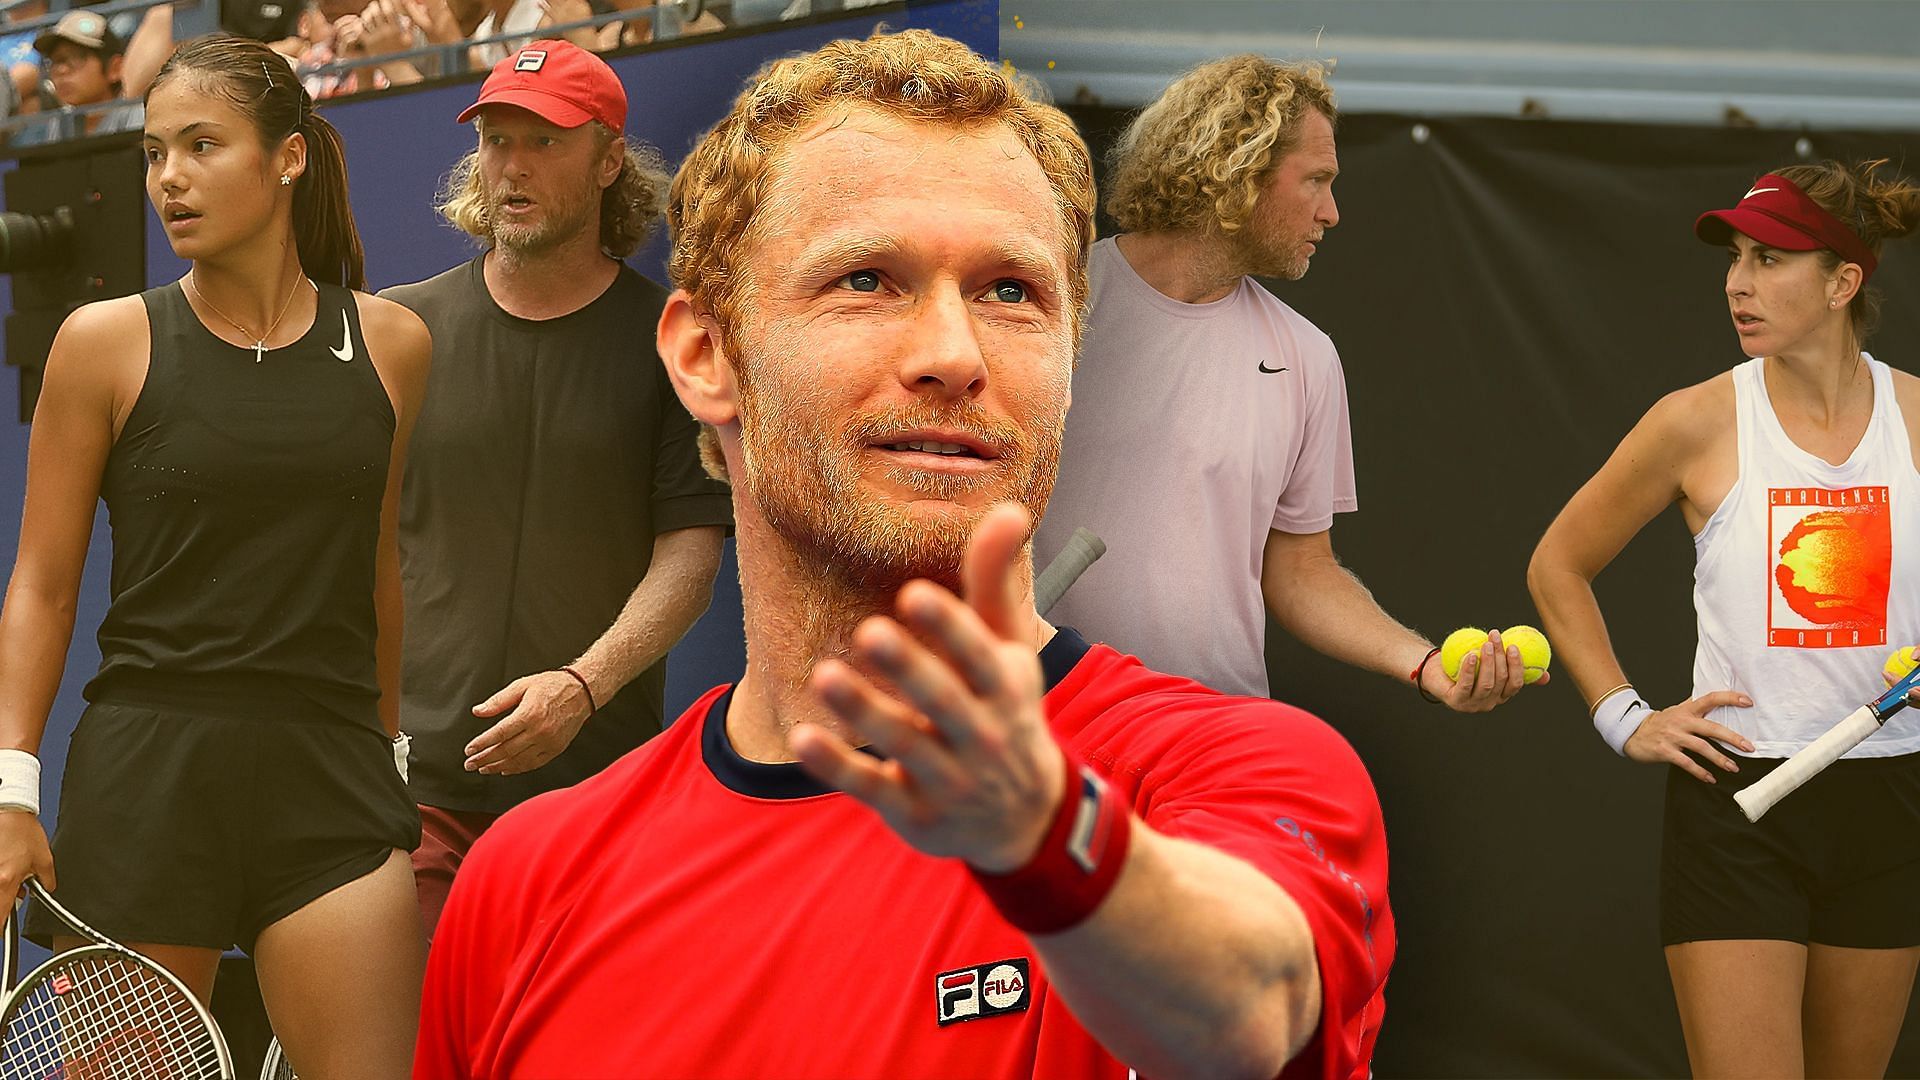 Dmitry Tursunov Exclusive: On transitioning from player to coach,  experience of coaching Emma Raducanu and Belinda Bencic, thoughts on the  Big-3, and more